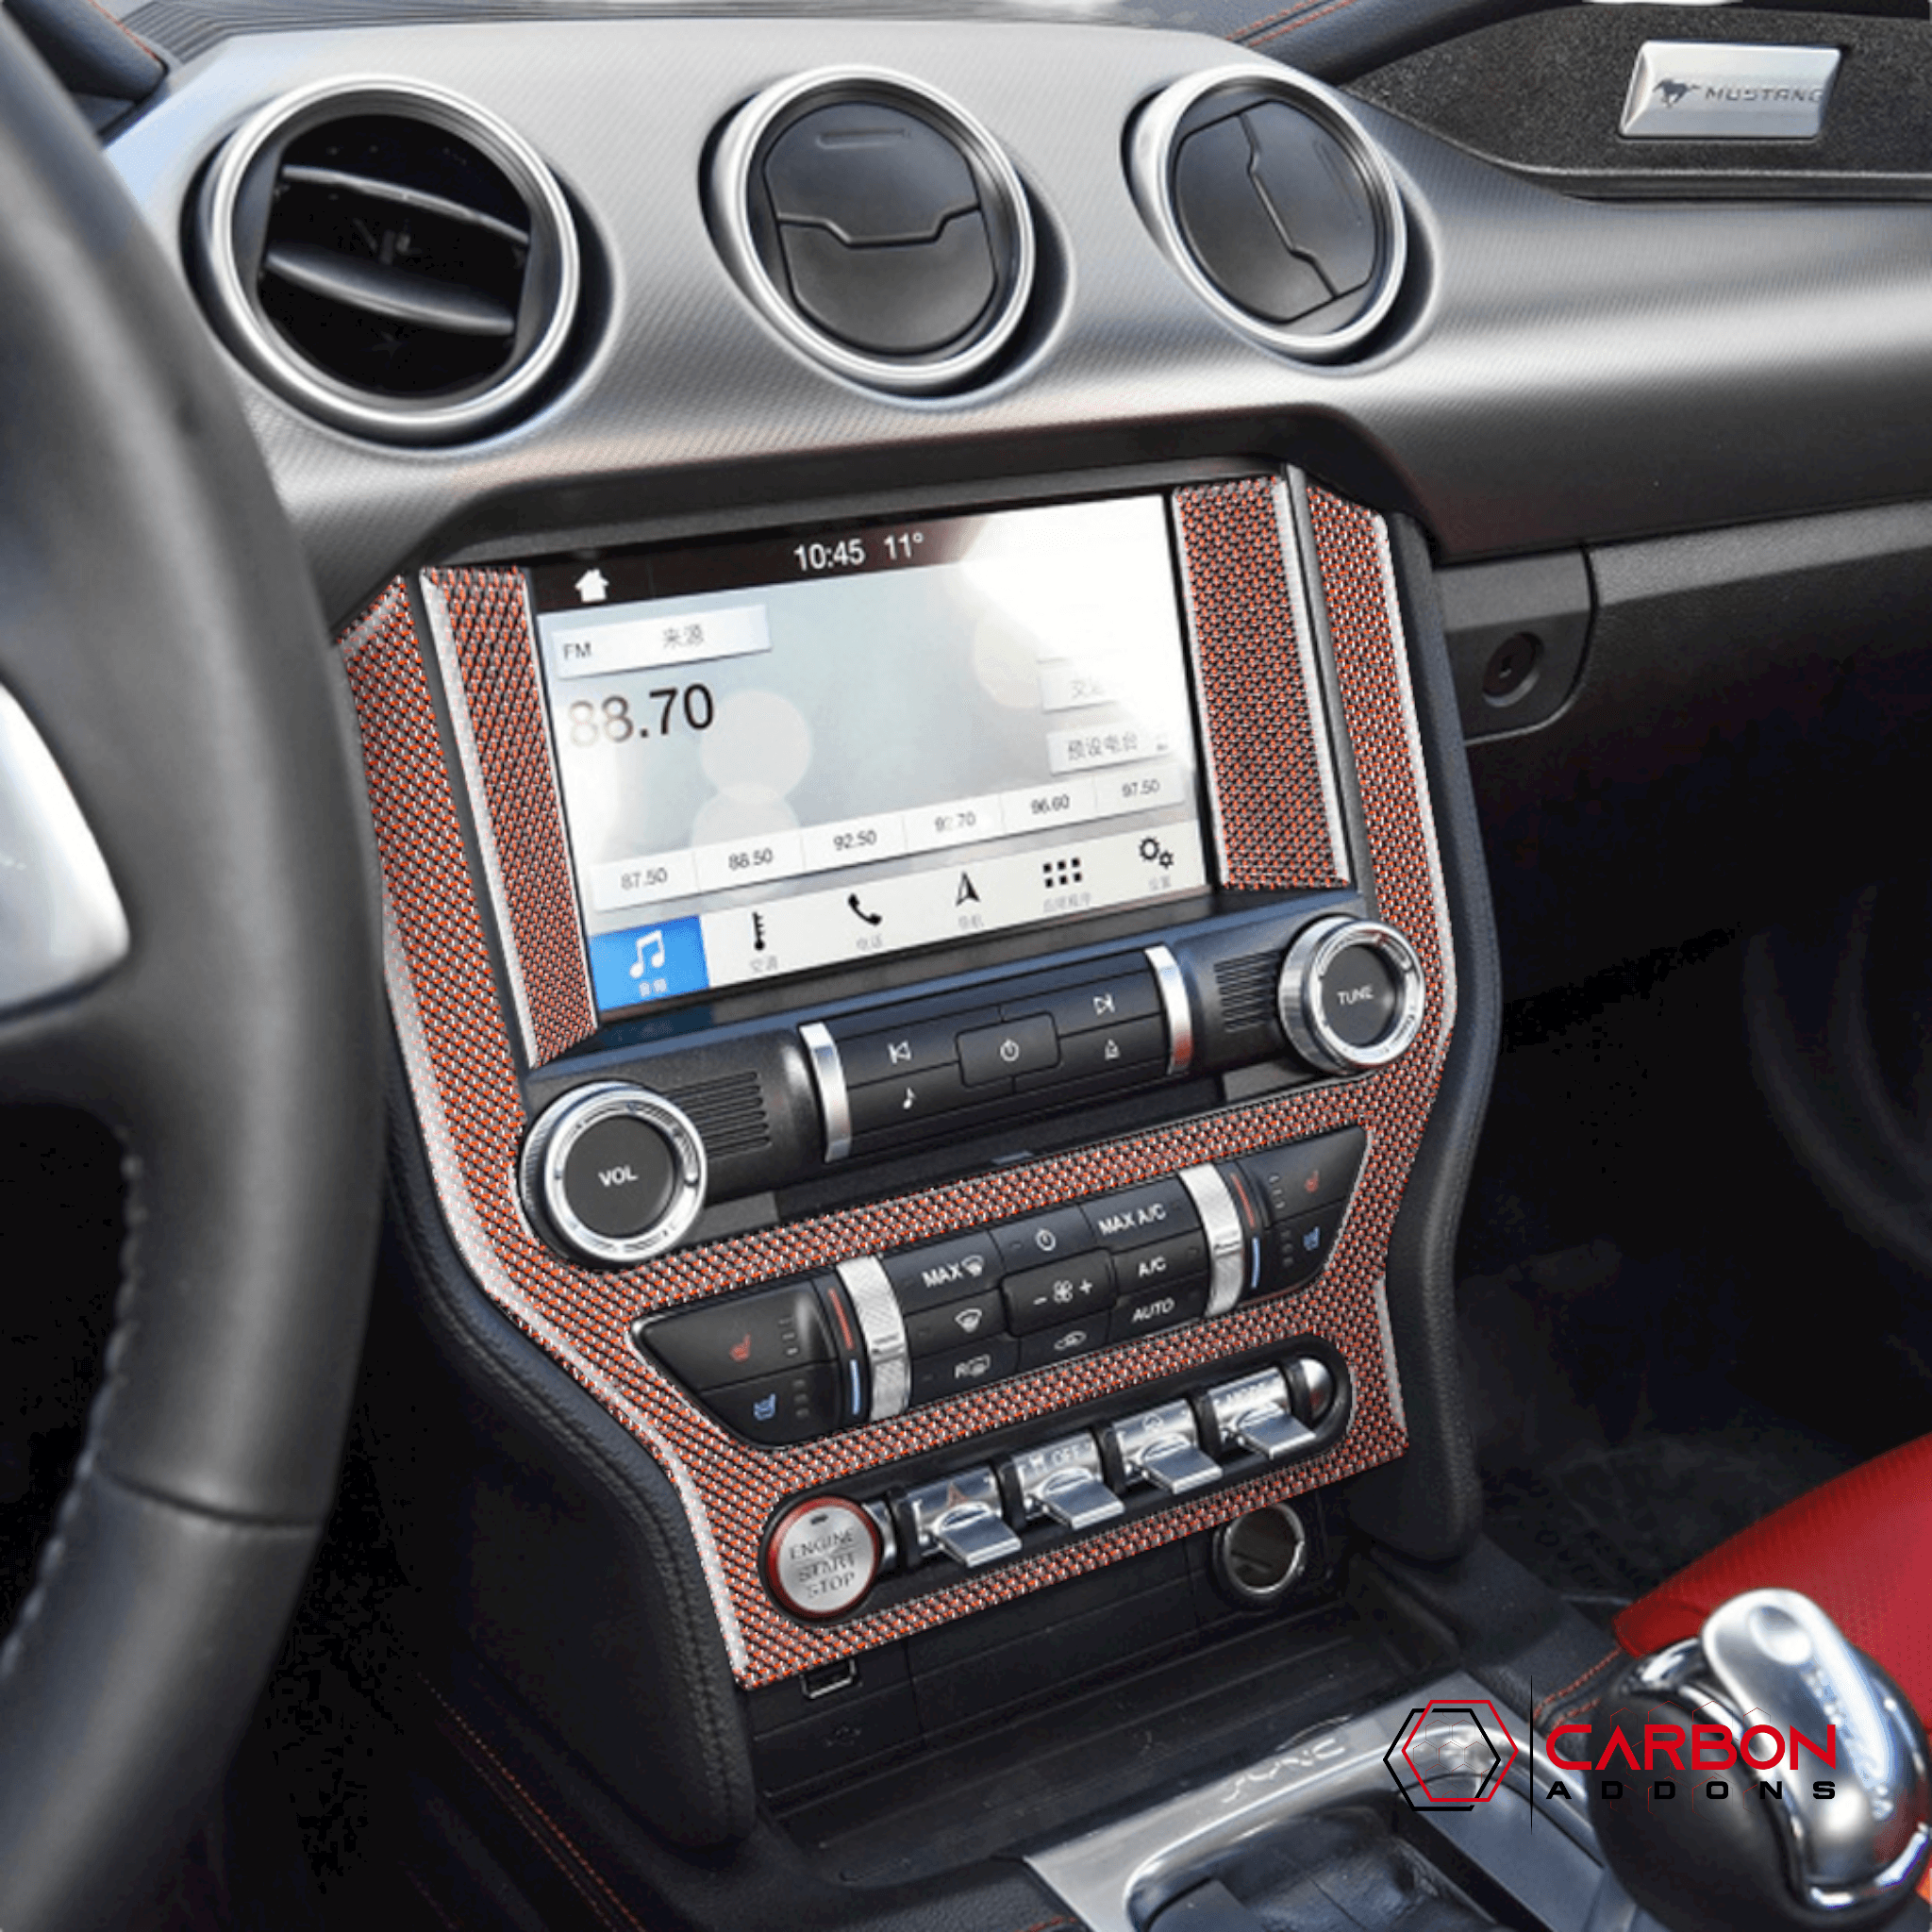 Reflective Carbon Fiber Multimedia Radio Trim Overlay for Ford Mustang 2015-2023 - carbonaddons Carbon Fiber Parts, Accessories, Upgrades, Mods